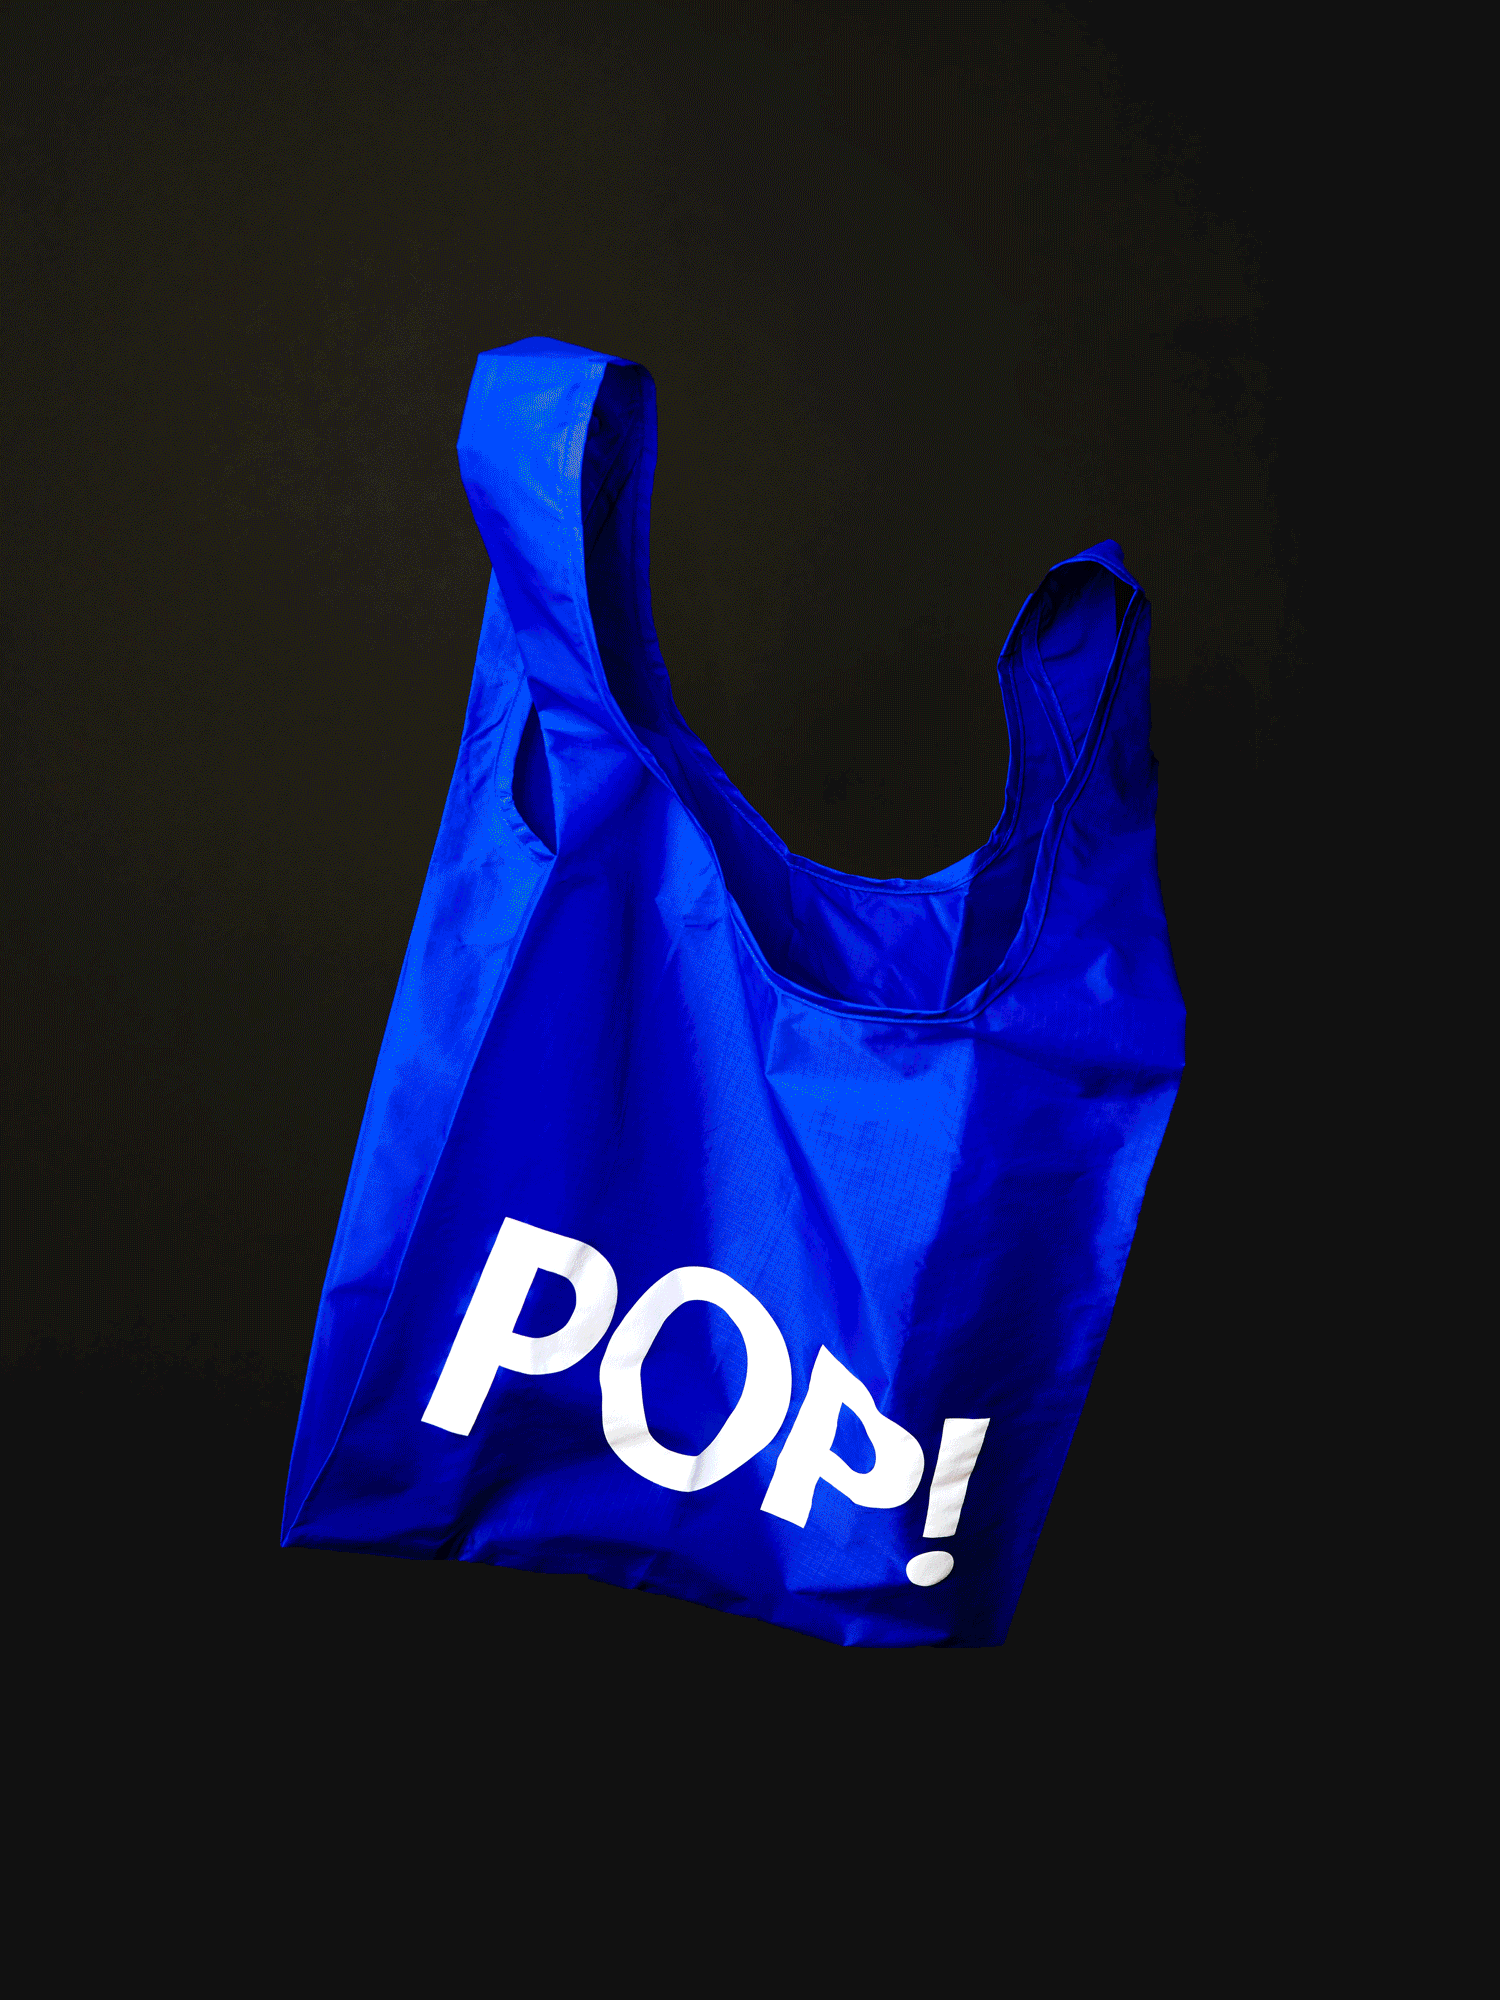 Graphic identity and bag design by New York based Collins for annual conference PopTech